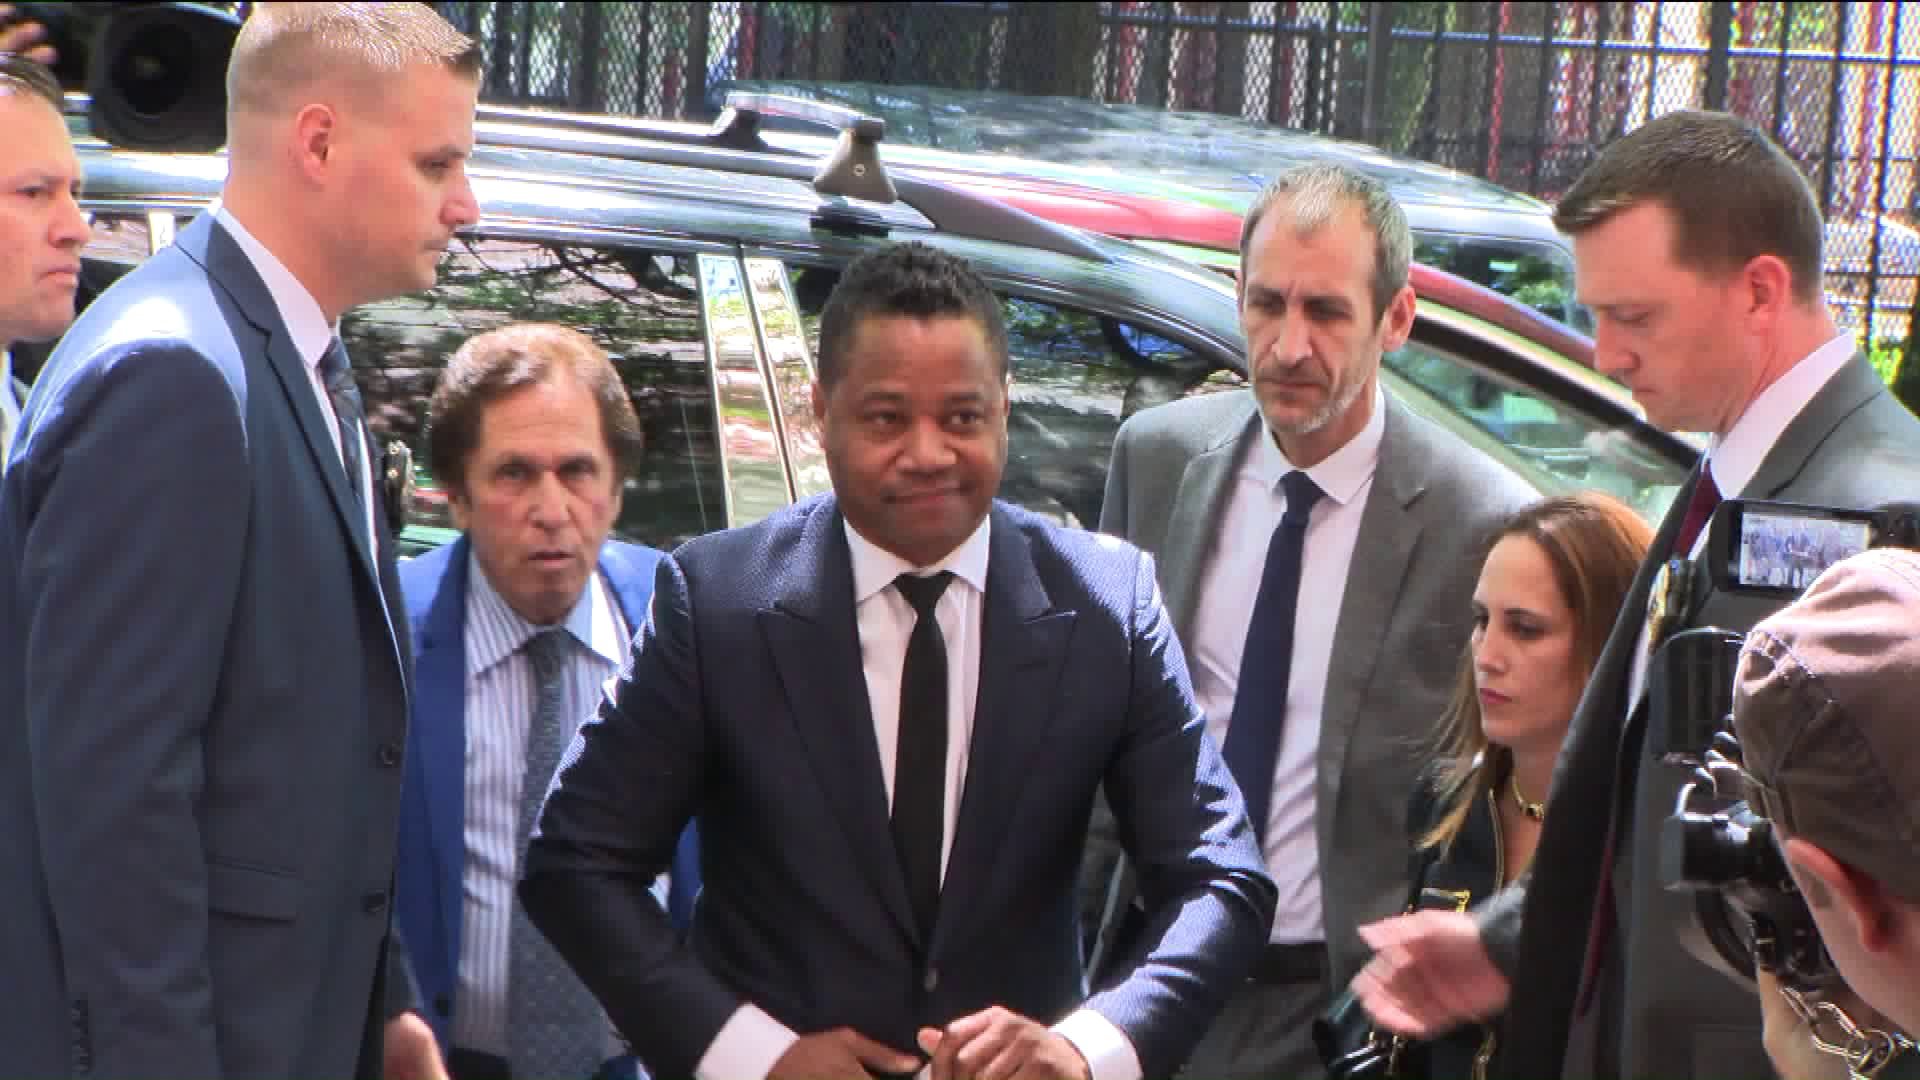 Cuba Gooding Jr Turns Himself In To NYPD!!!